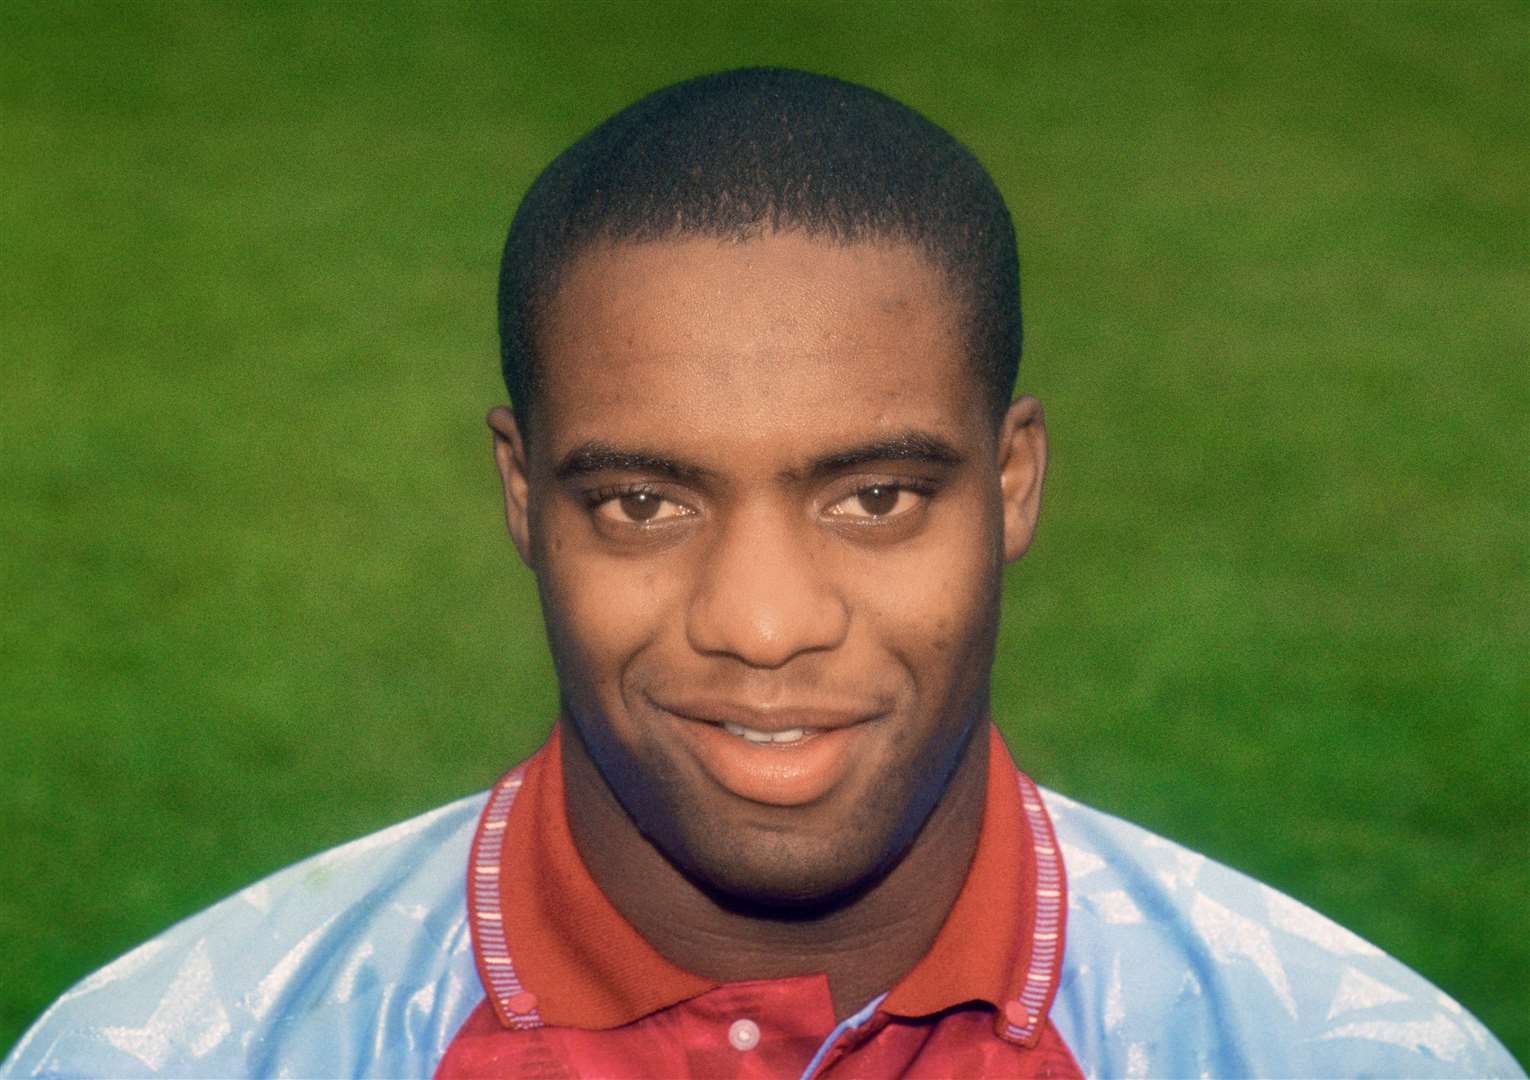 Dalian Atkinson, pictured in 1991, during his time at Aston Villa. (PA Wire)